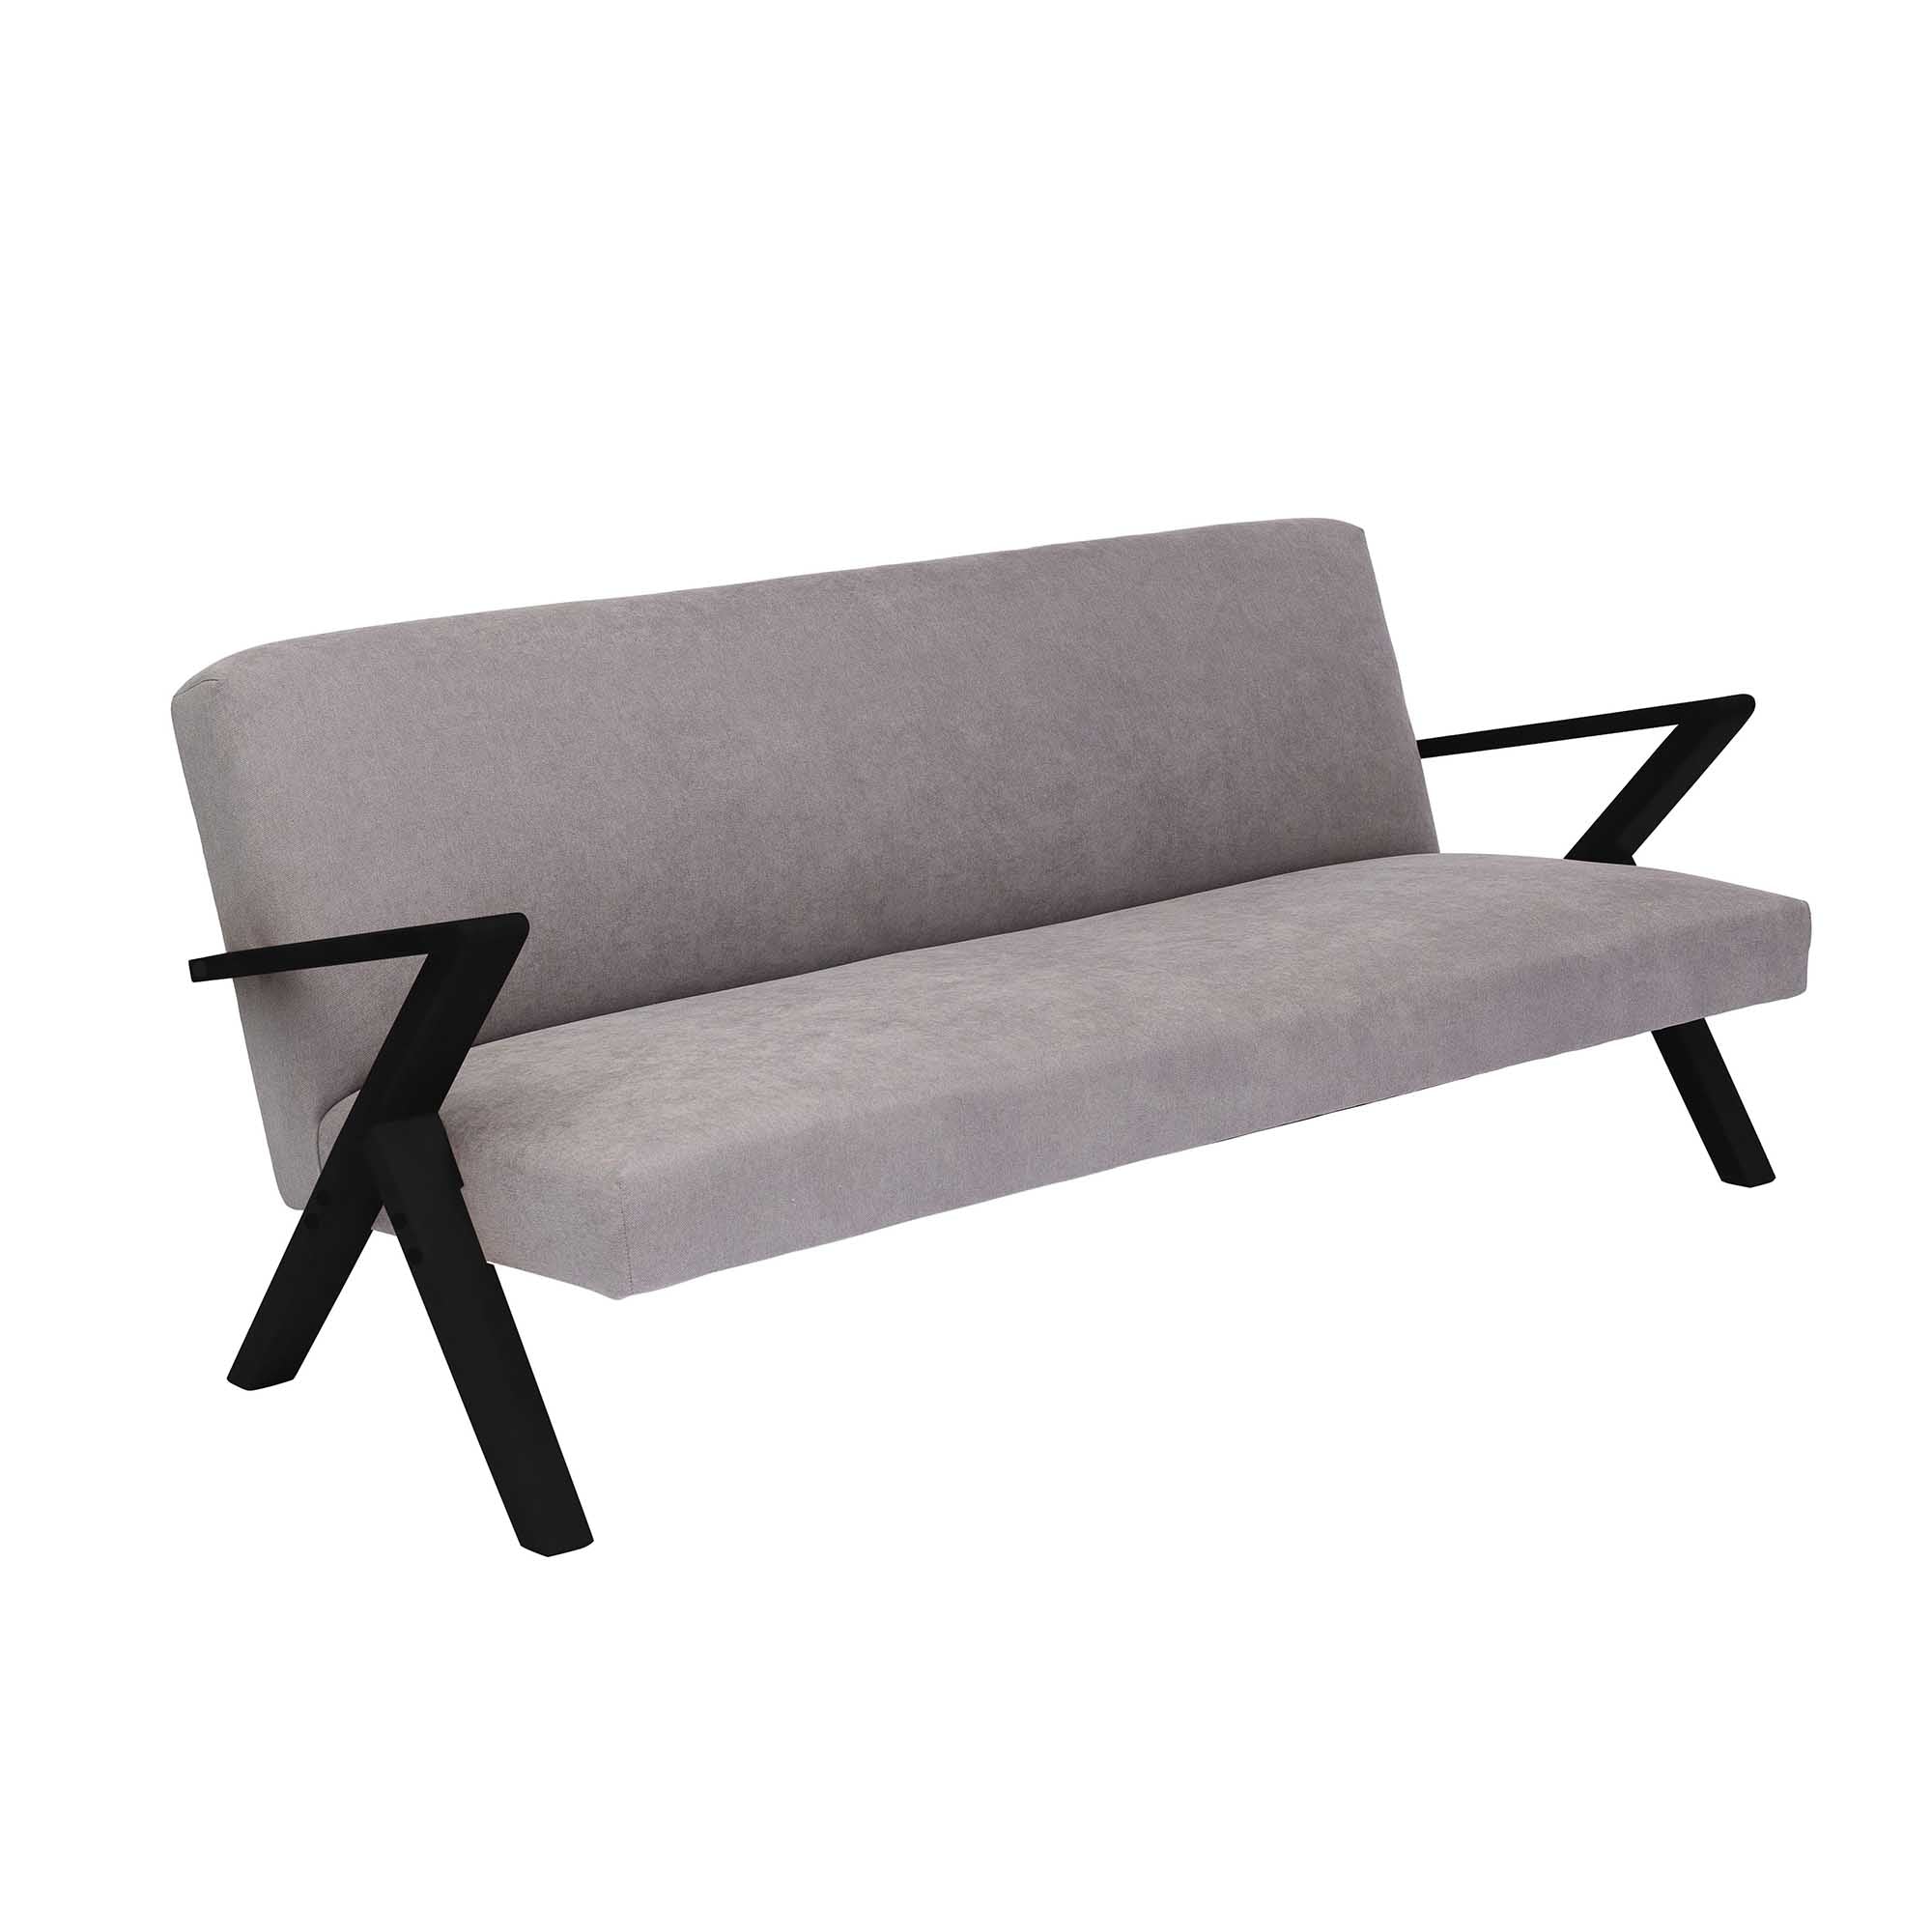  4-seater Sofa Beech Wood Frame, Black Lacquered grey fabric, half-side view